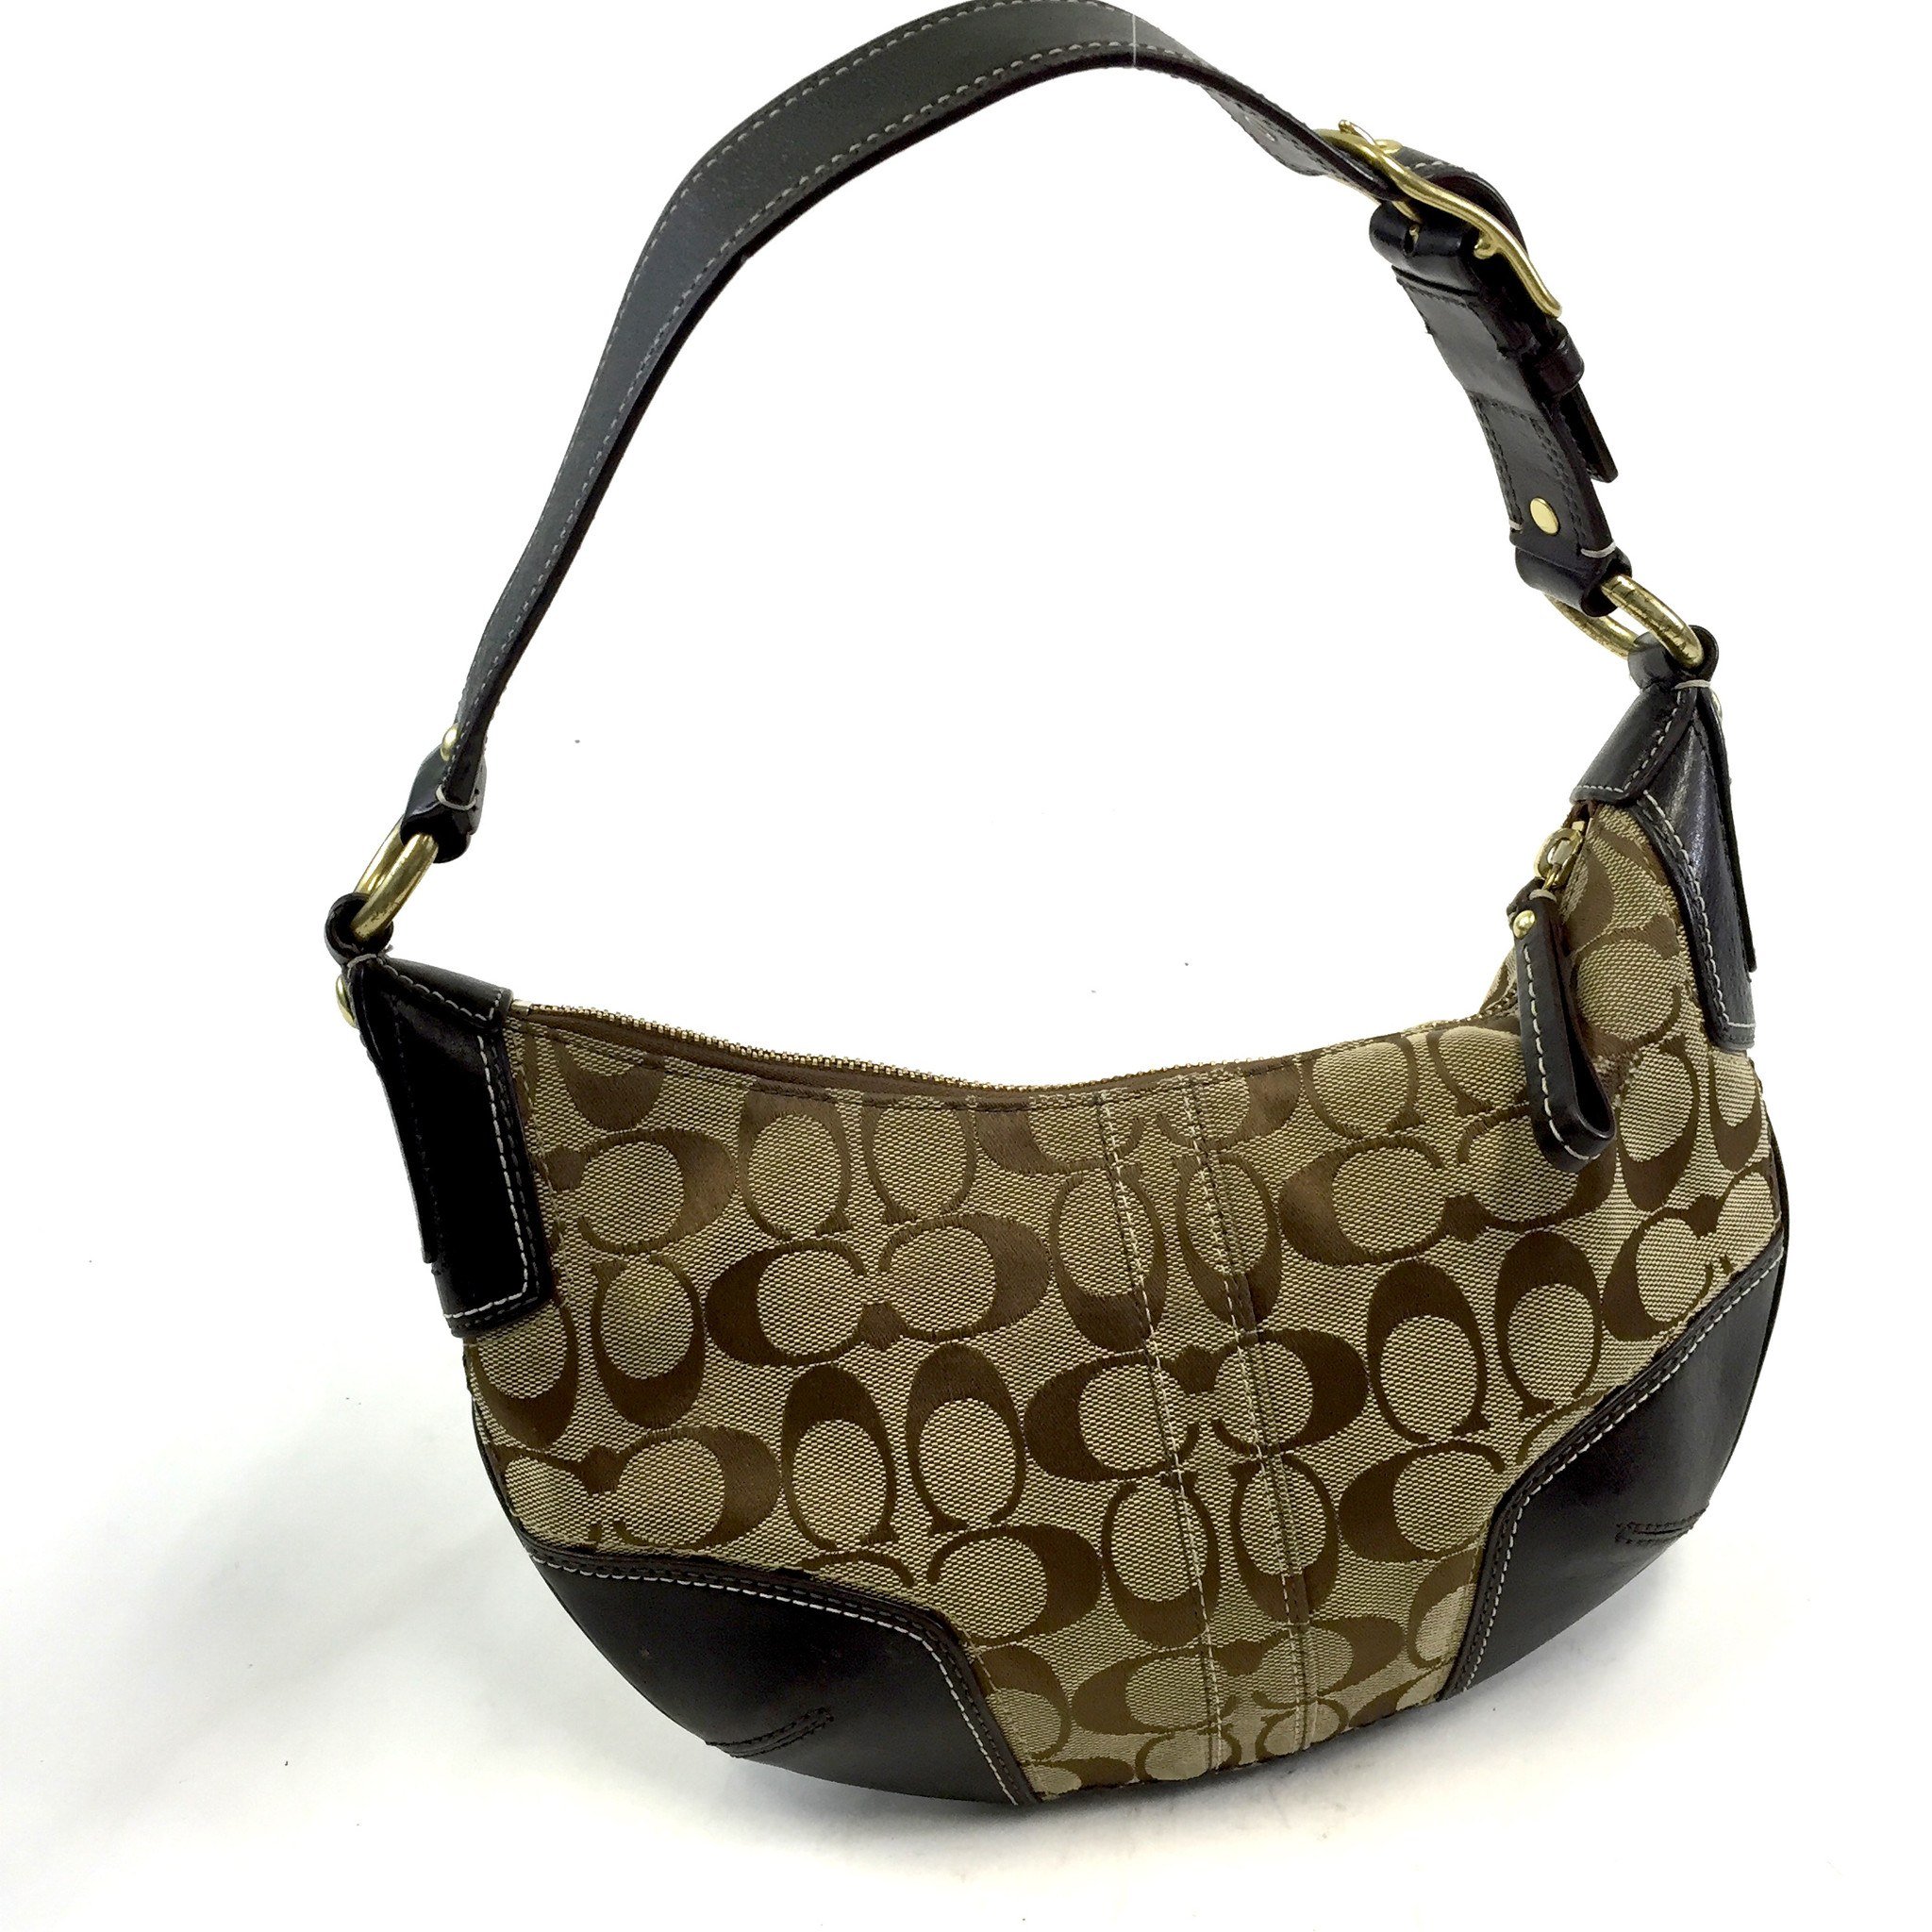 Popular Bags From the Early 2000s